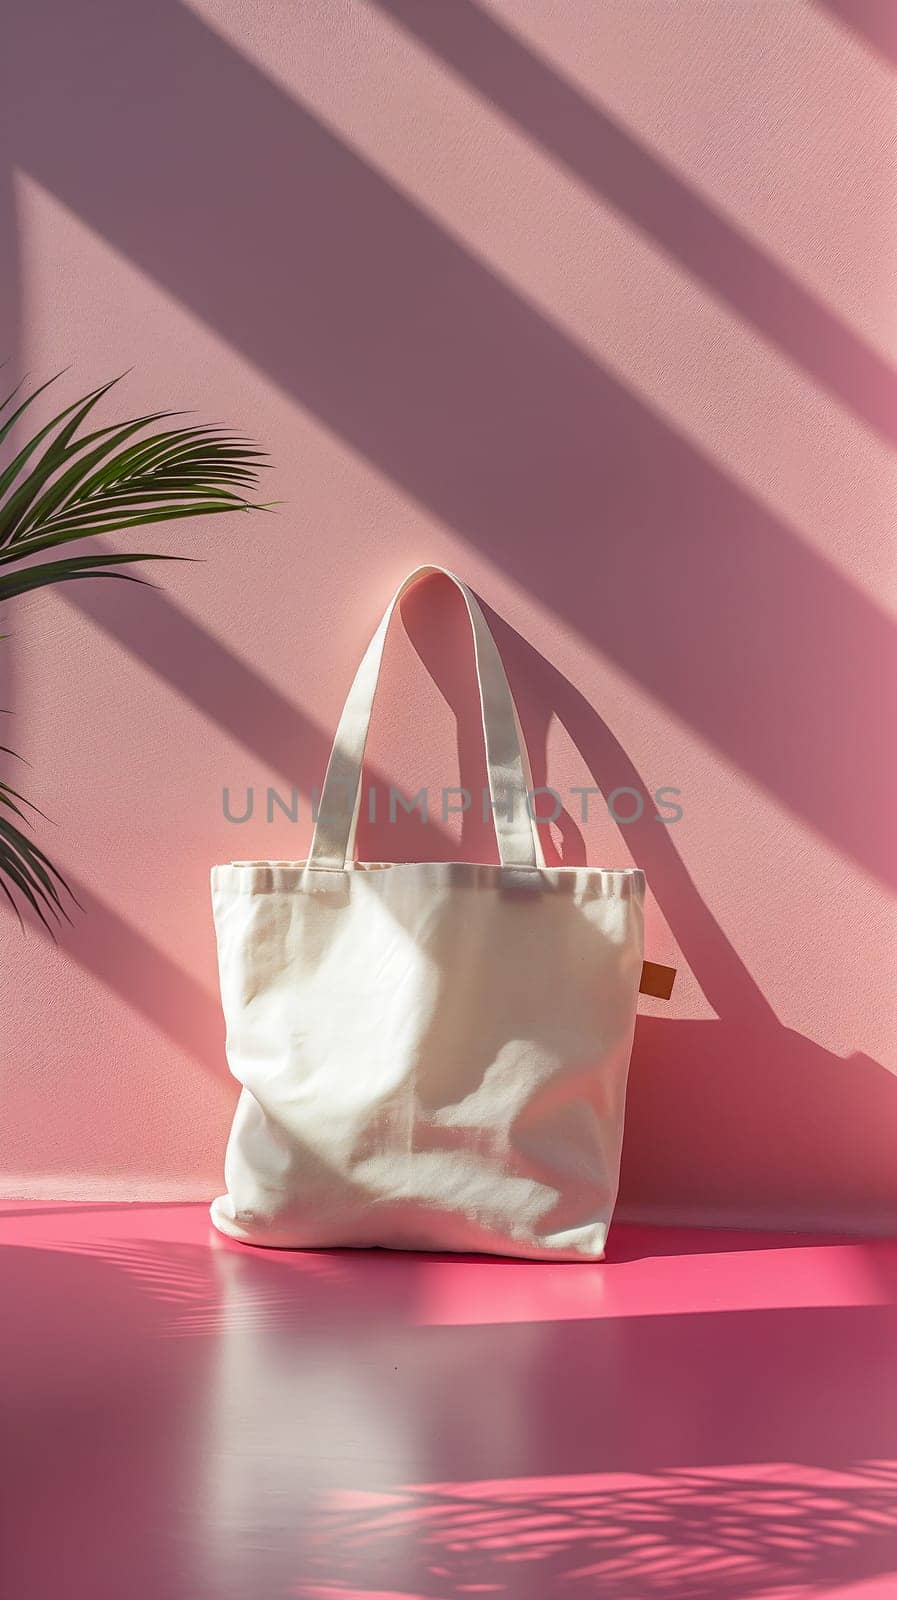 A vertical image of a white canvas tote bag casting a shadow against a vibrant pink wall, with a touch of green foliage